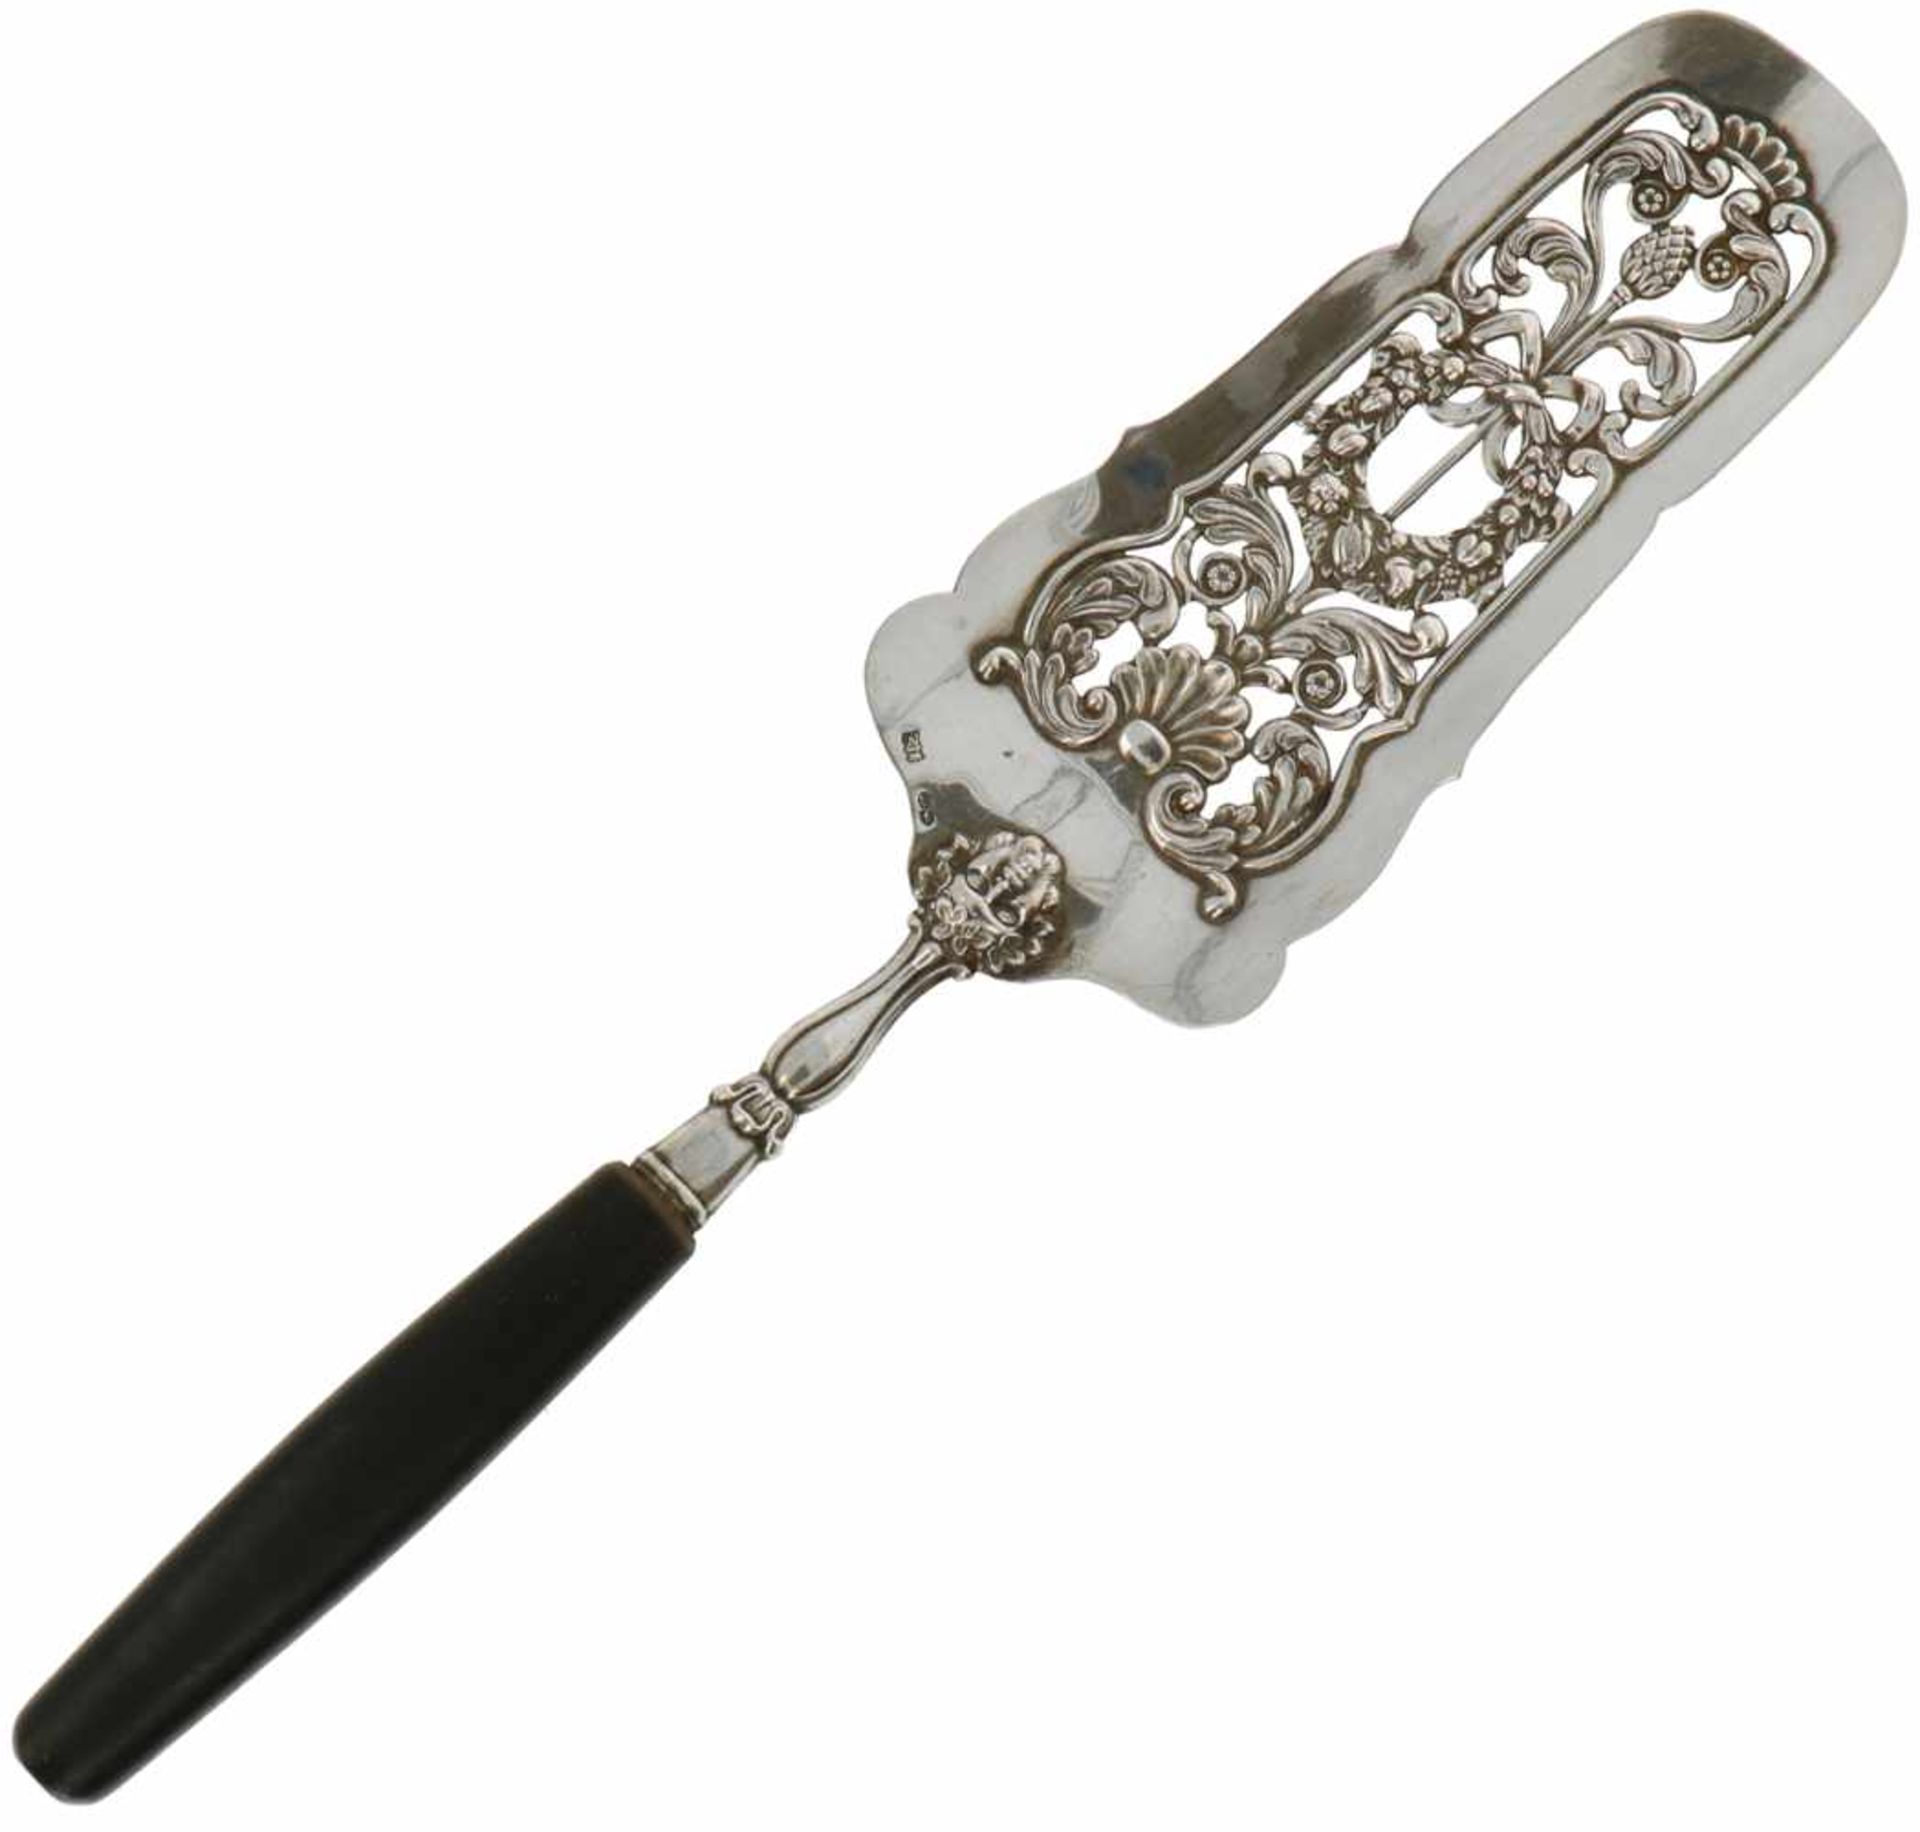 Silver pastry spoon.